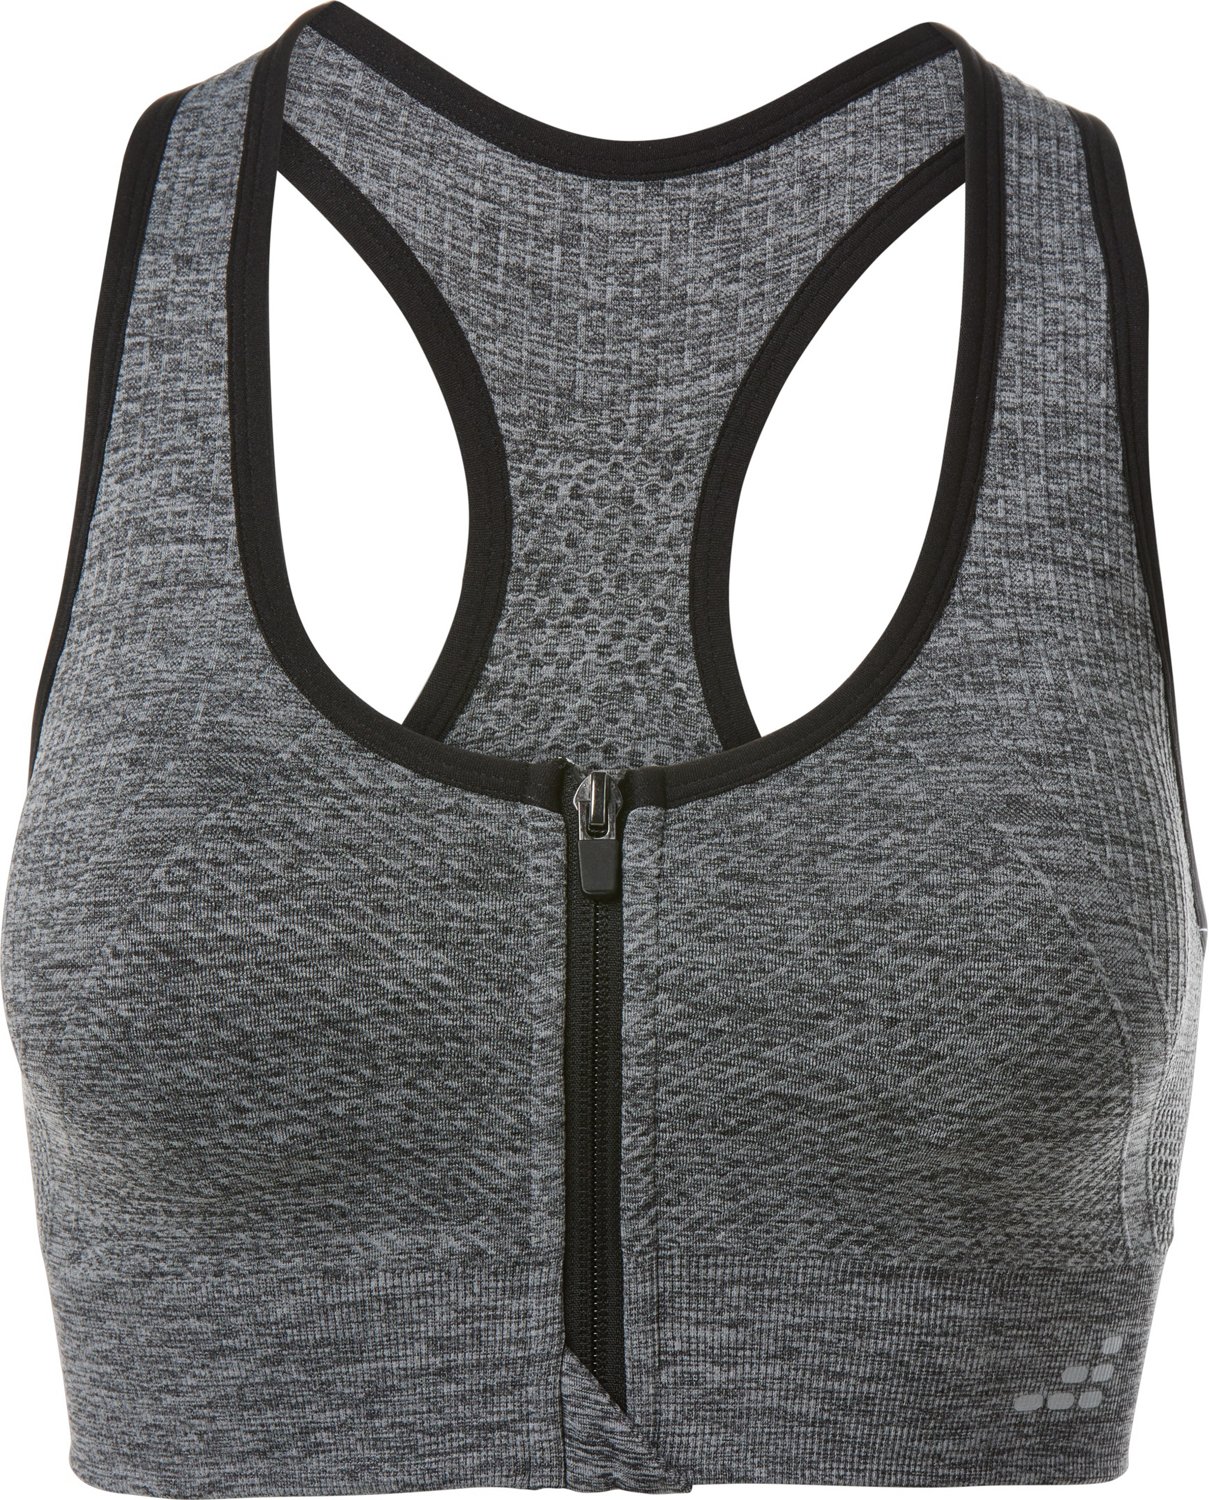 Bcg Black sports bra - $9 (40% Off Retail) - From Kasey